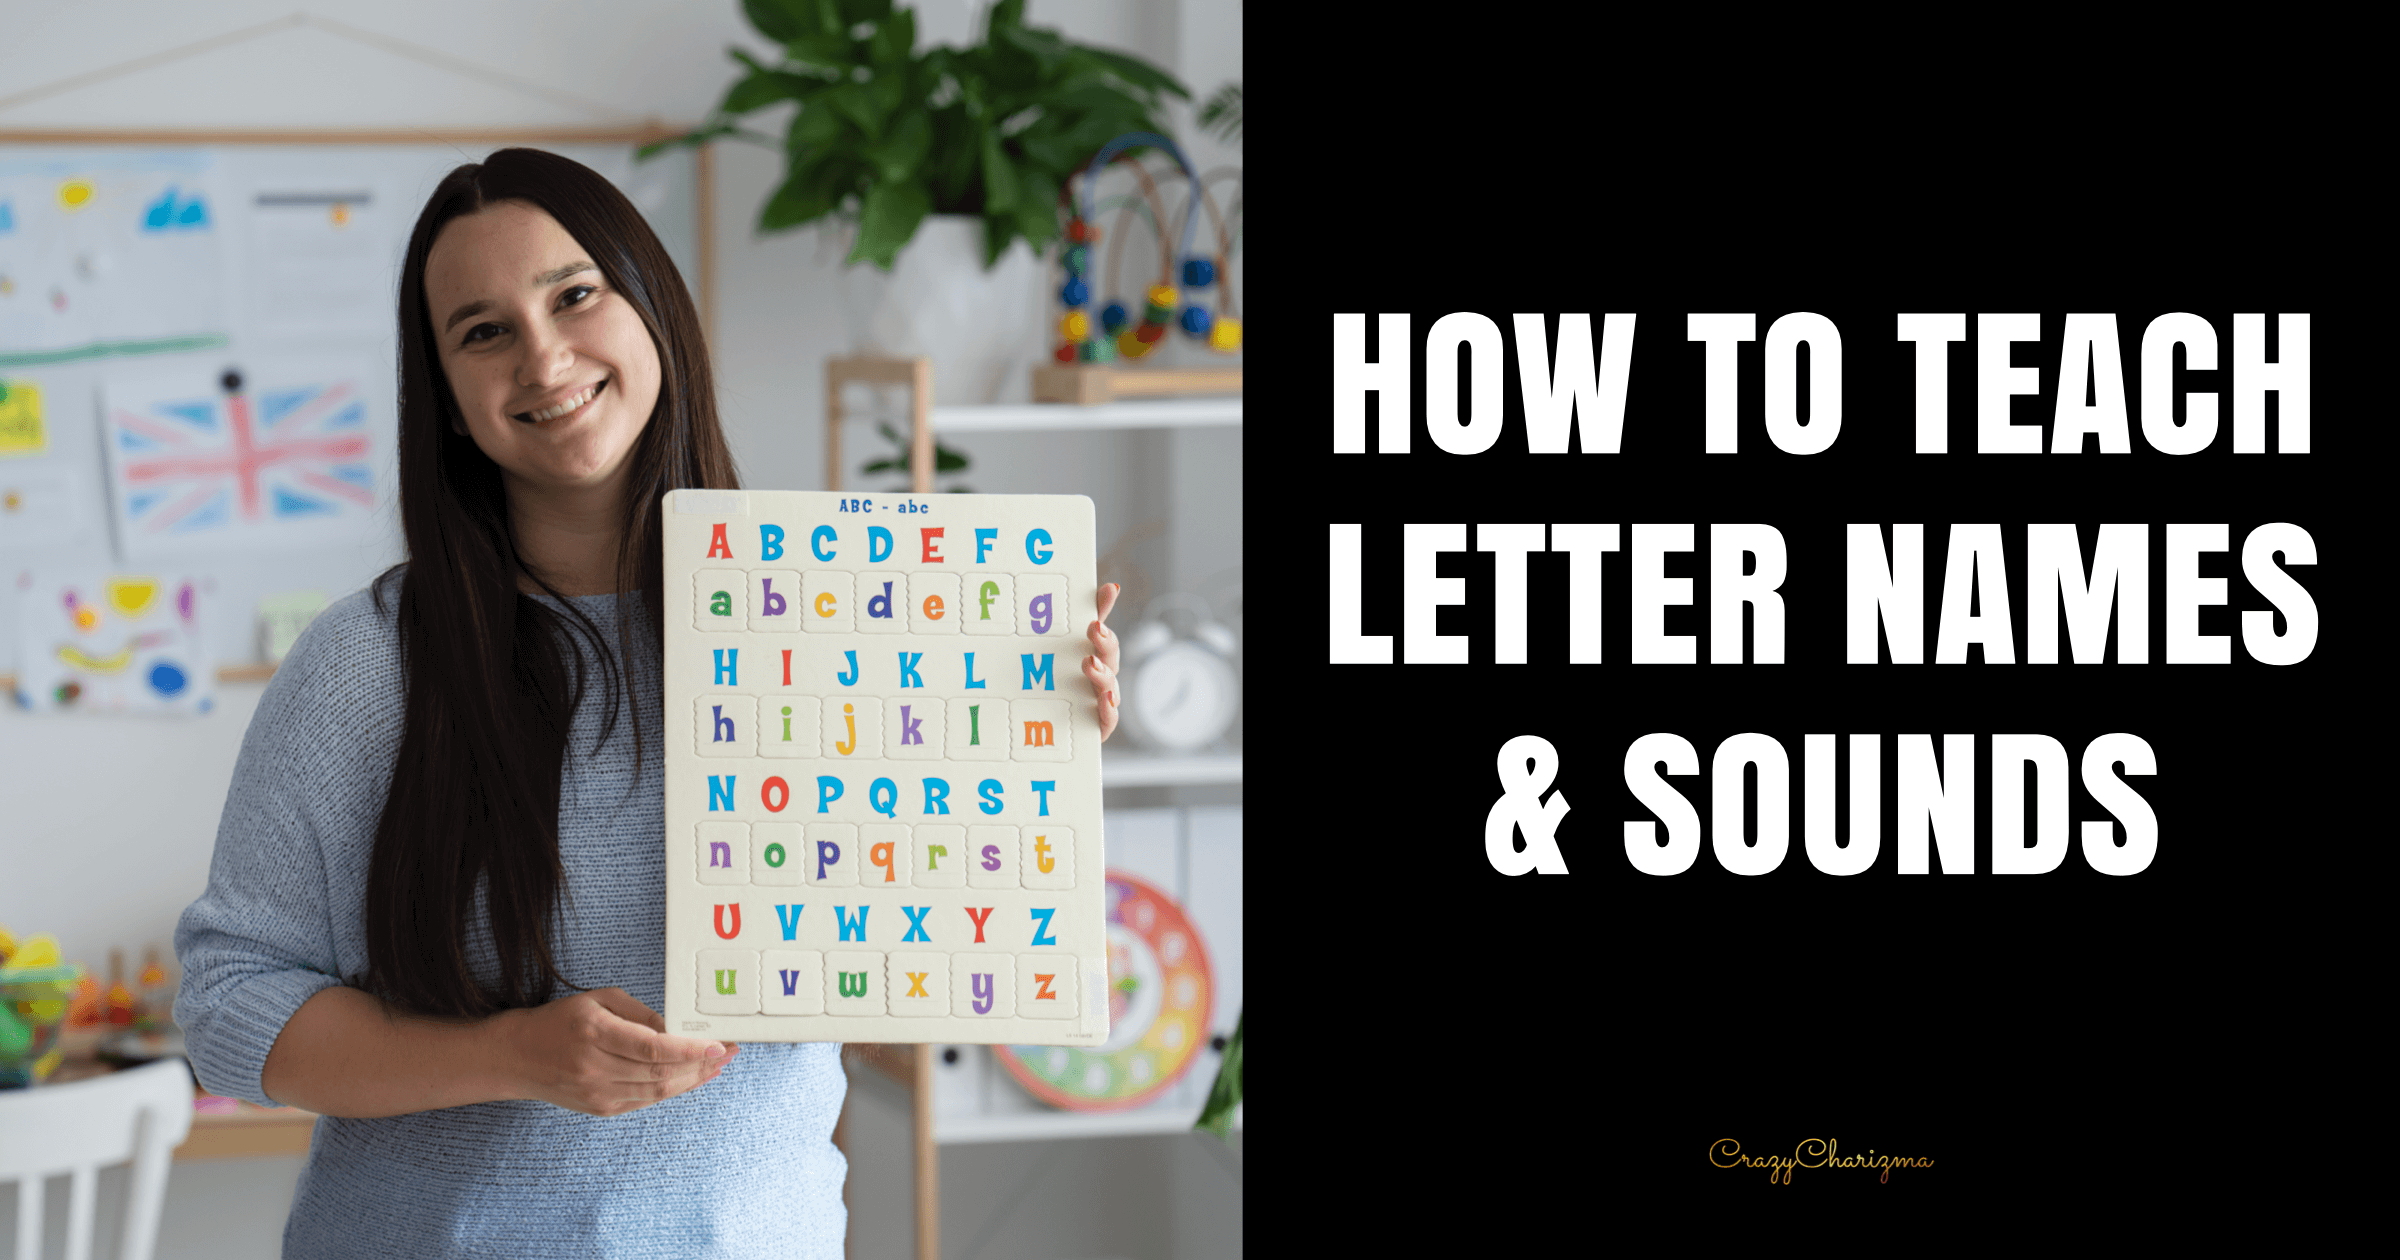 How to Teach Letter Names and Sounds (Plus Free Alphabet Download)